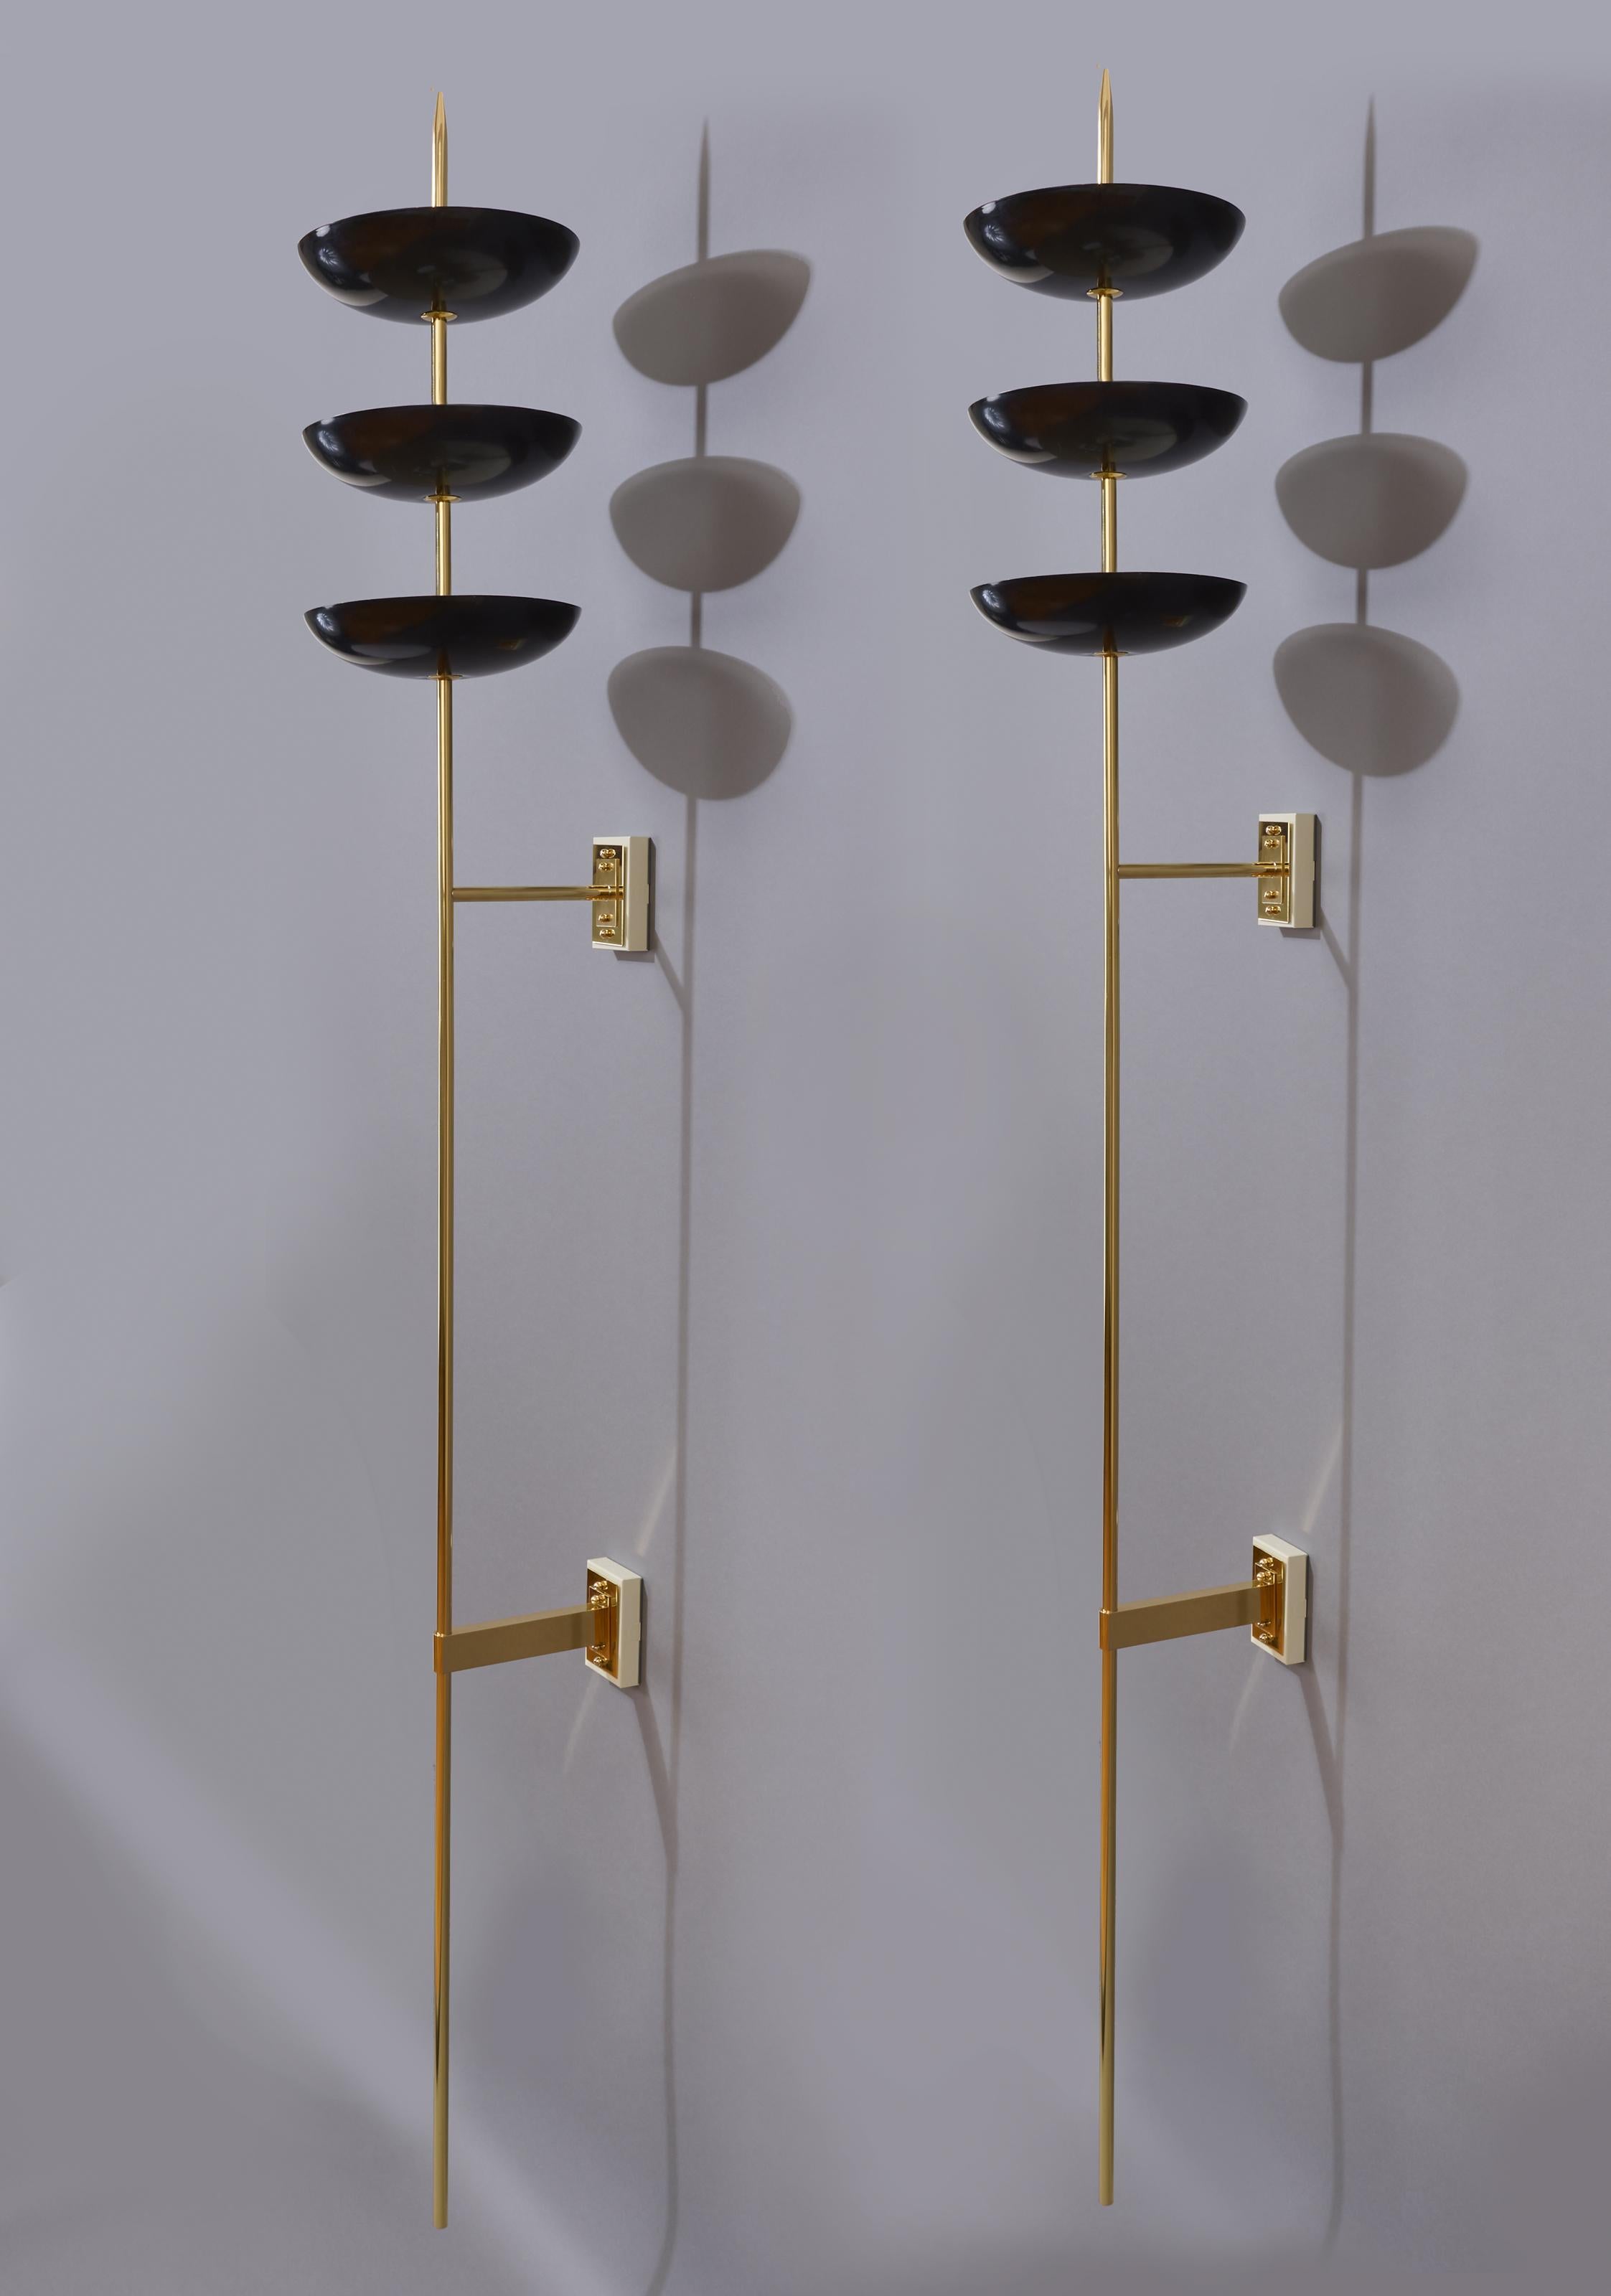 Stilnovo

A monumental pair of spear-like, seven and a quarter foot tall sconces by Stilnovo. Three shallow bowls, in black enamel with white interior, float on the upper third of a polished brass shaft with a long and pointed finial. The sconces